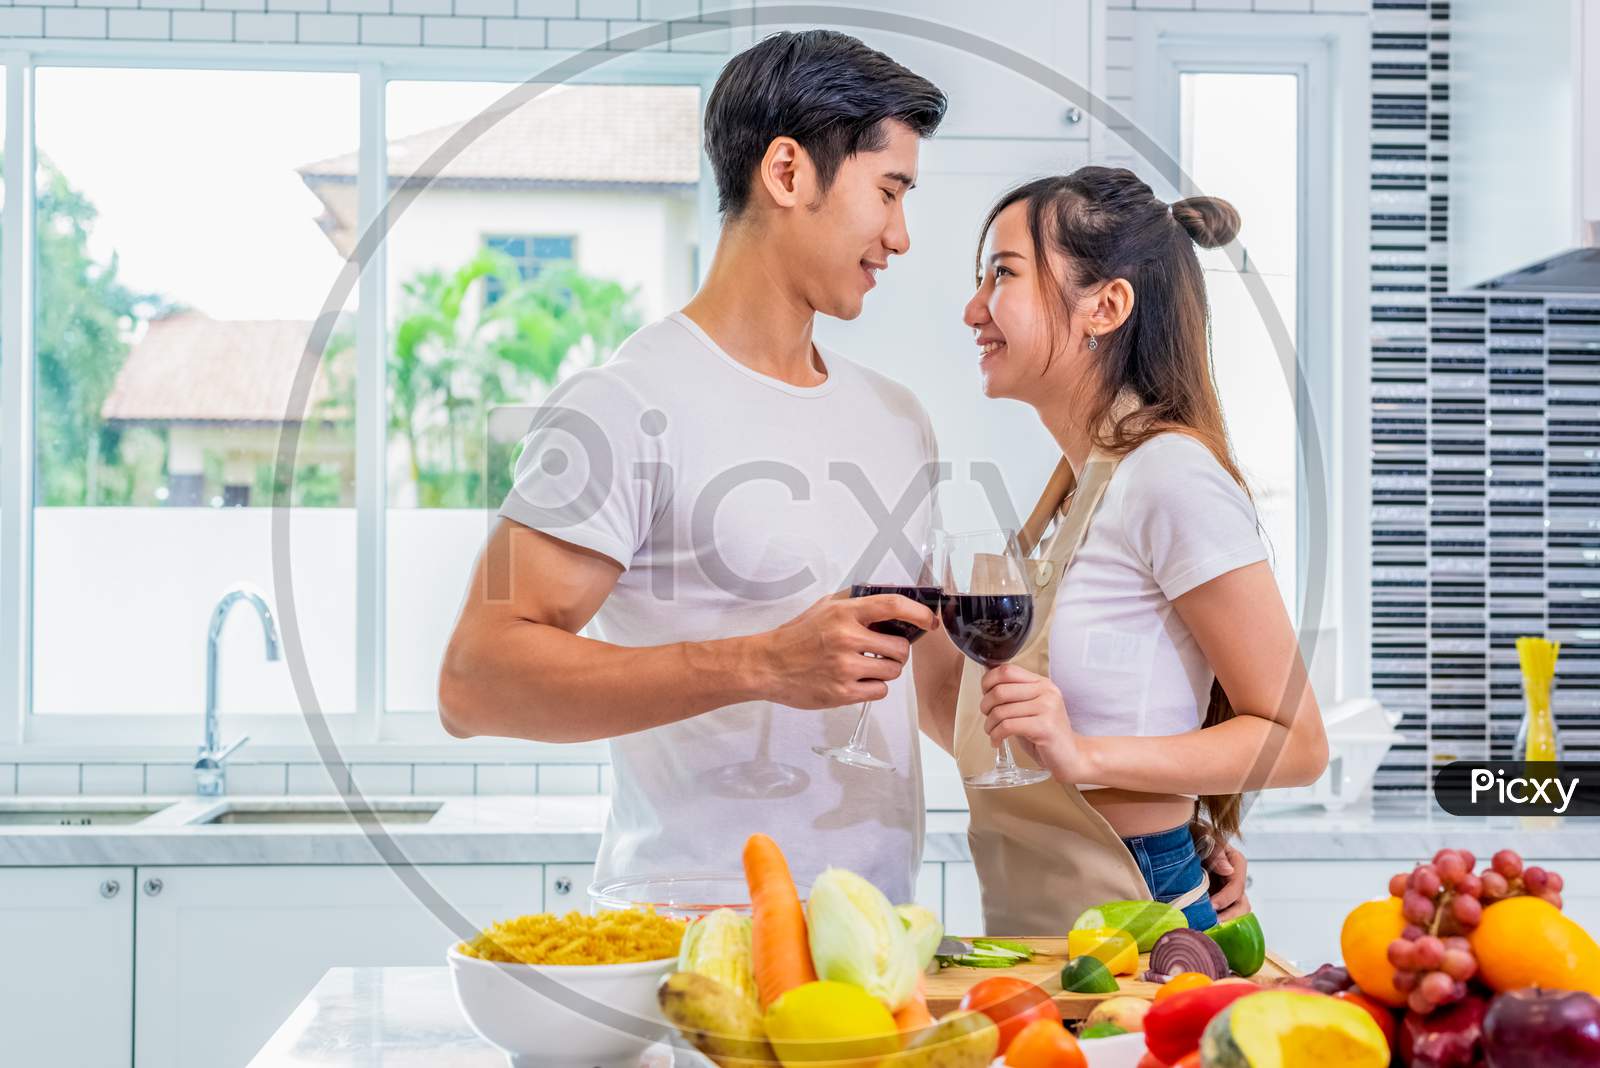 Happy Asian Young Married Couple Drinking Wine And Looking Each Other In Home Kitchen. Boyfriend And Girlfriend Cooking Together. People Lifestyle And Romantic Relationship Concept. Valentines Day